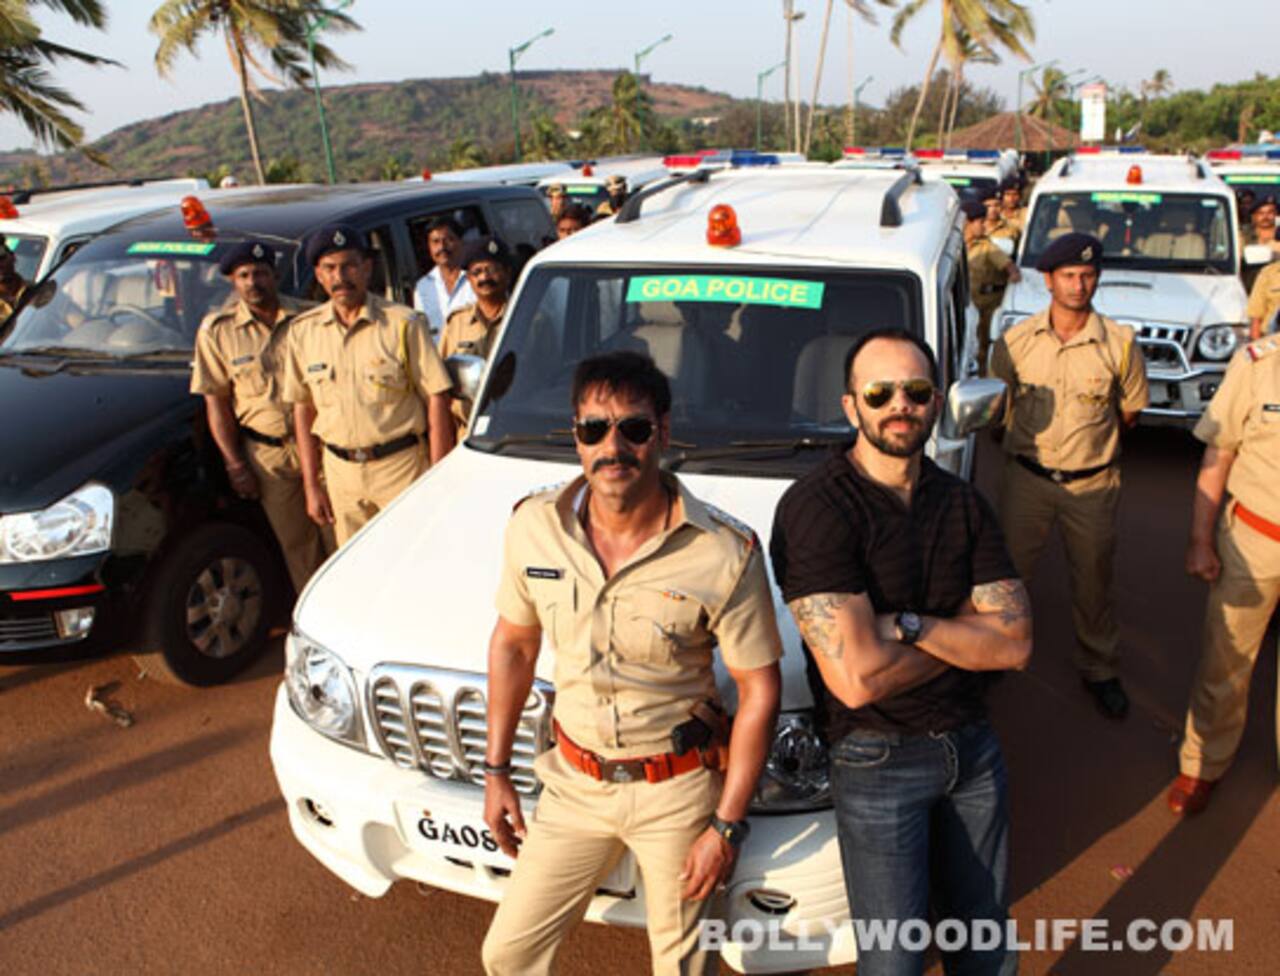 Ajay Devgn and Rohit Shetty play a prank on crew members of Singham Returns  - Bollywood News & Gossip, Movie Reviews, Trailers & Videos at  